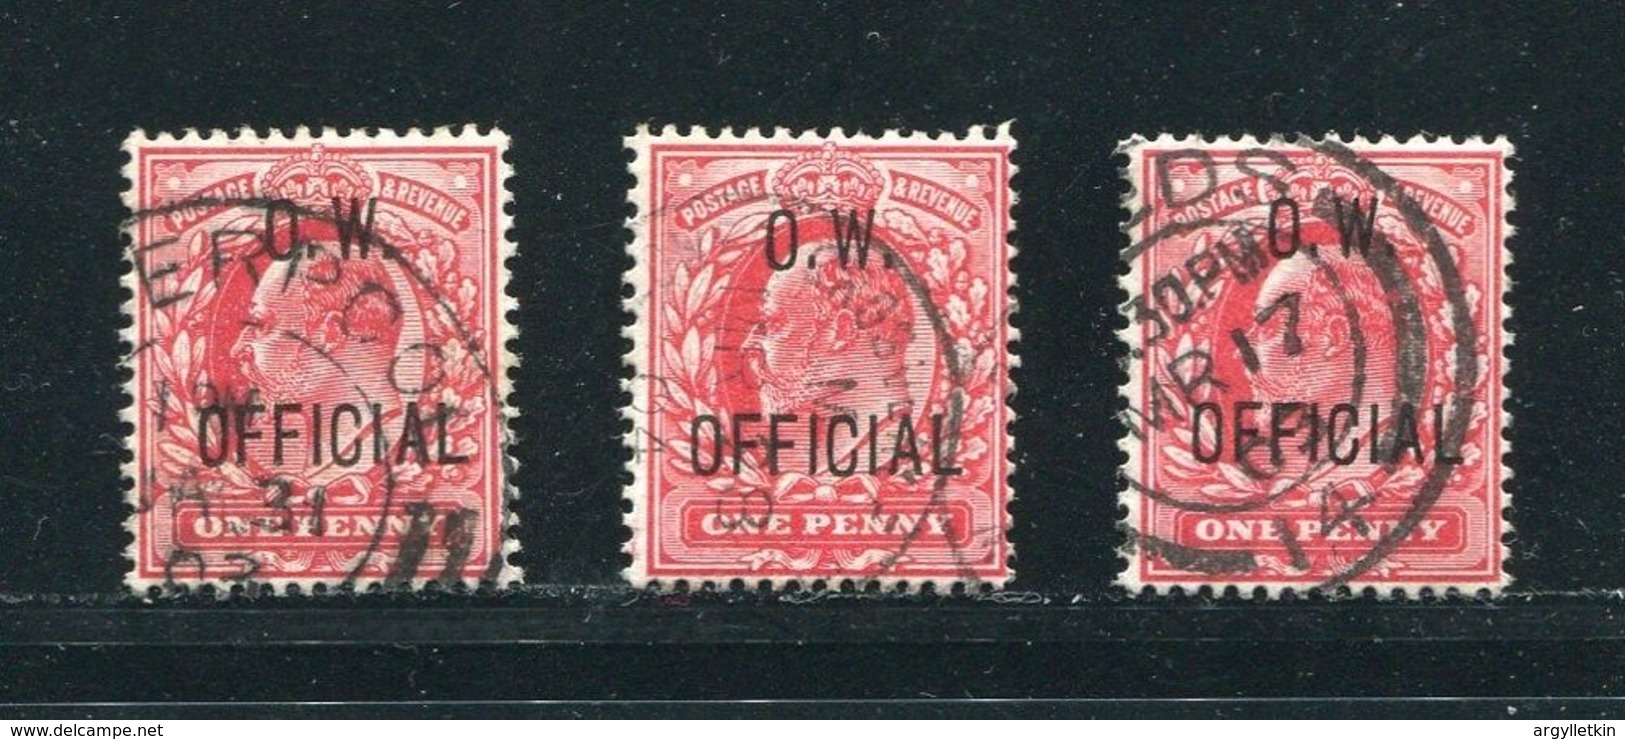 GB KING EDWARD 7TH OFFICIAL STAMPS O.W. OFFICIAL LEEDS LIVERPOOL - Unclassified